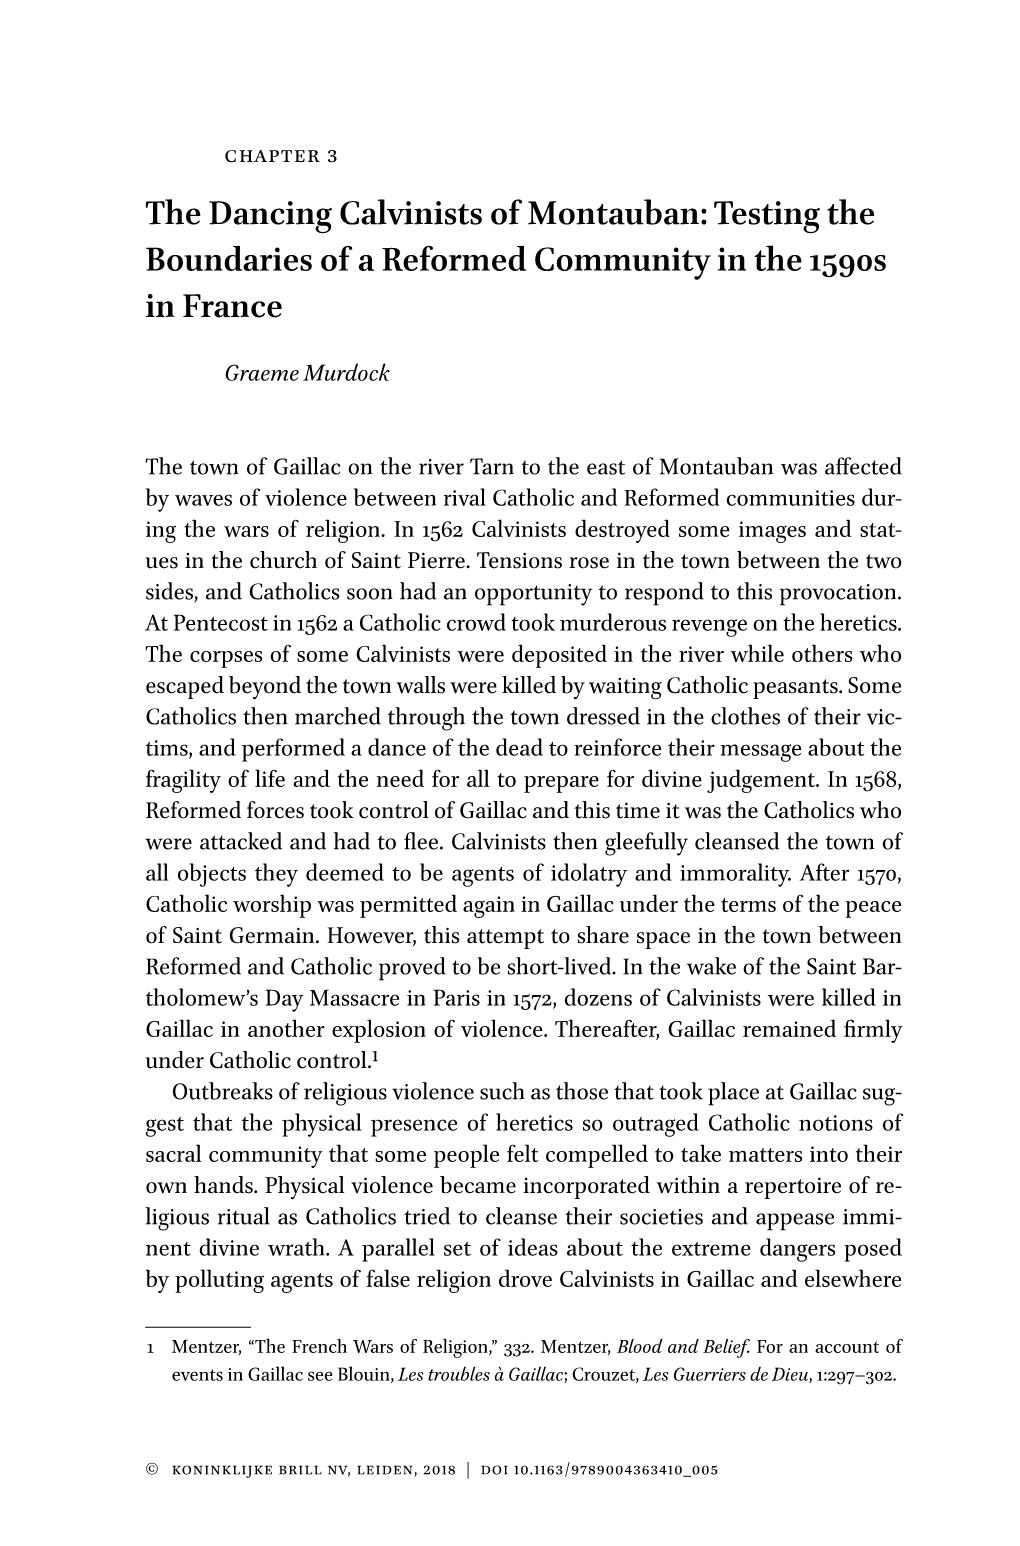 The Dancing Calvinists of Montauban: Testing the Boundaries of a Reformed Community in the 1590S in France